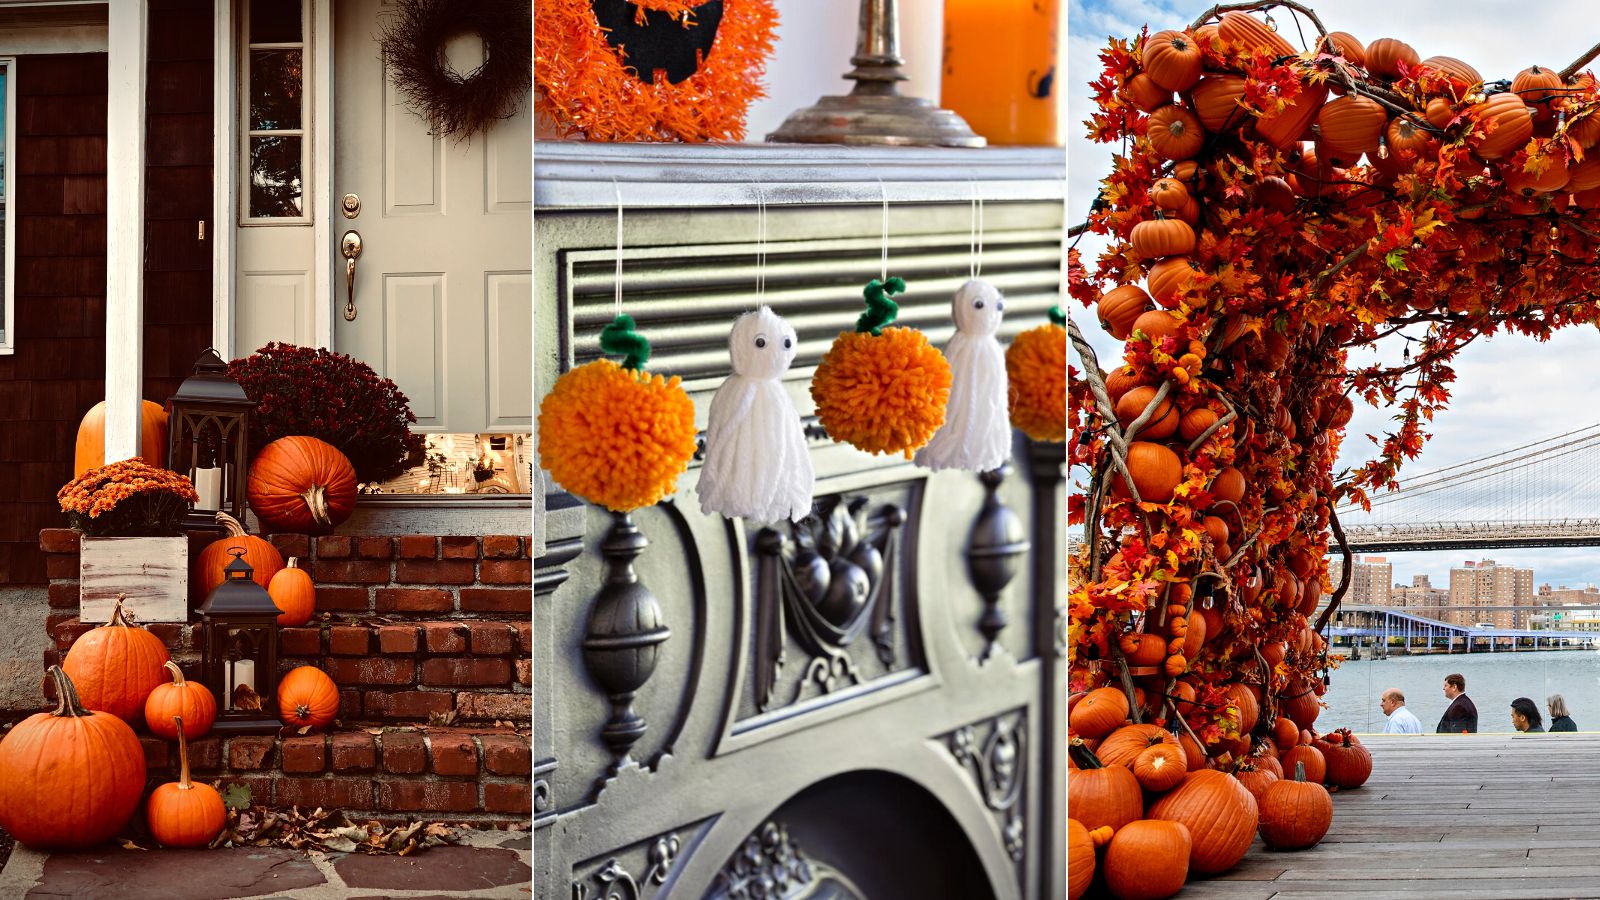 The Top 5 Most Popular Halloween Decorations |